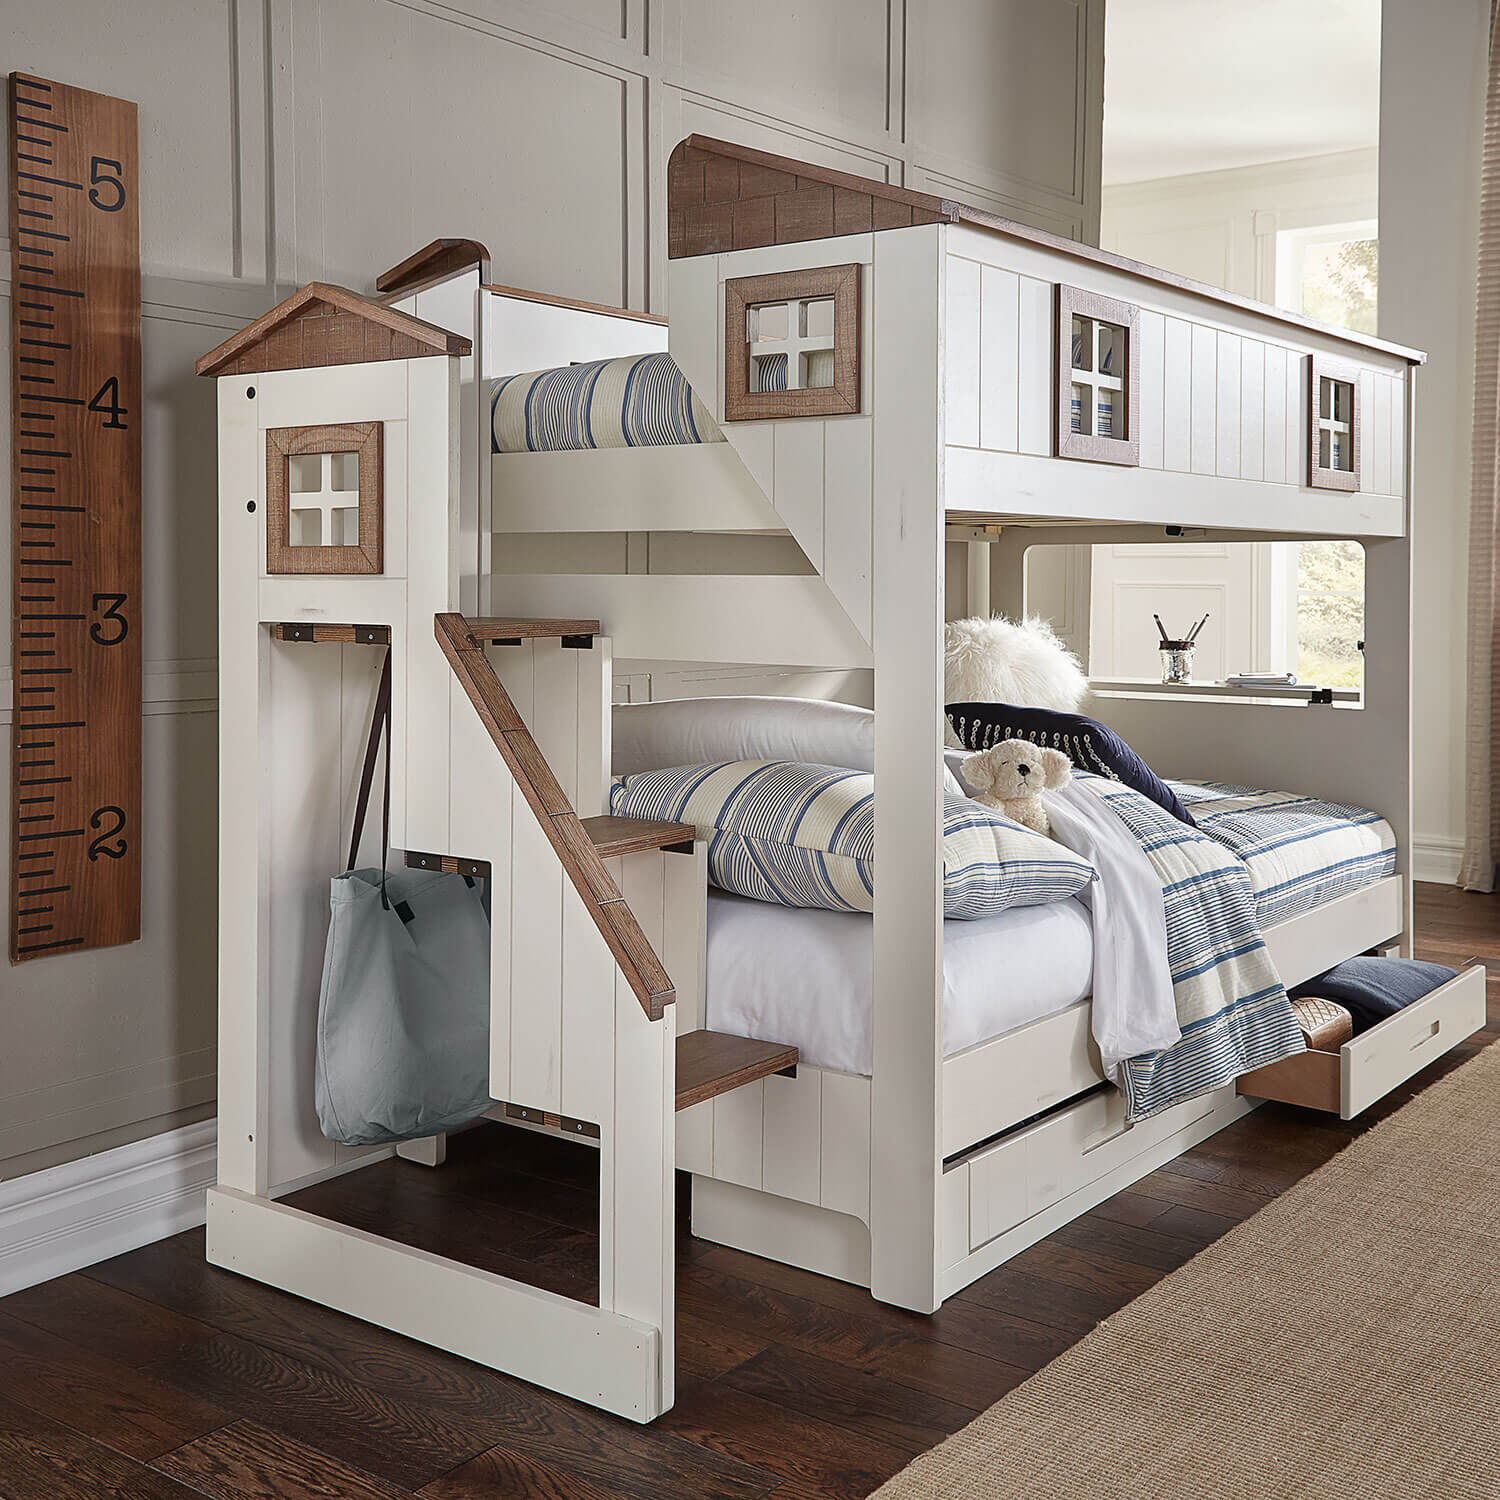 bunk beds with mattresses for sale